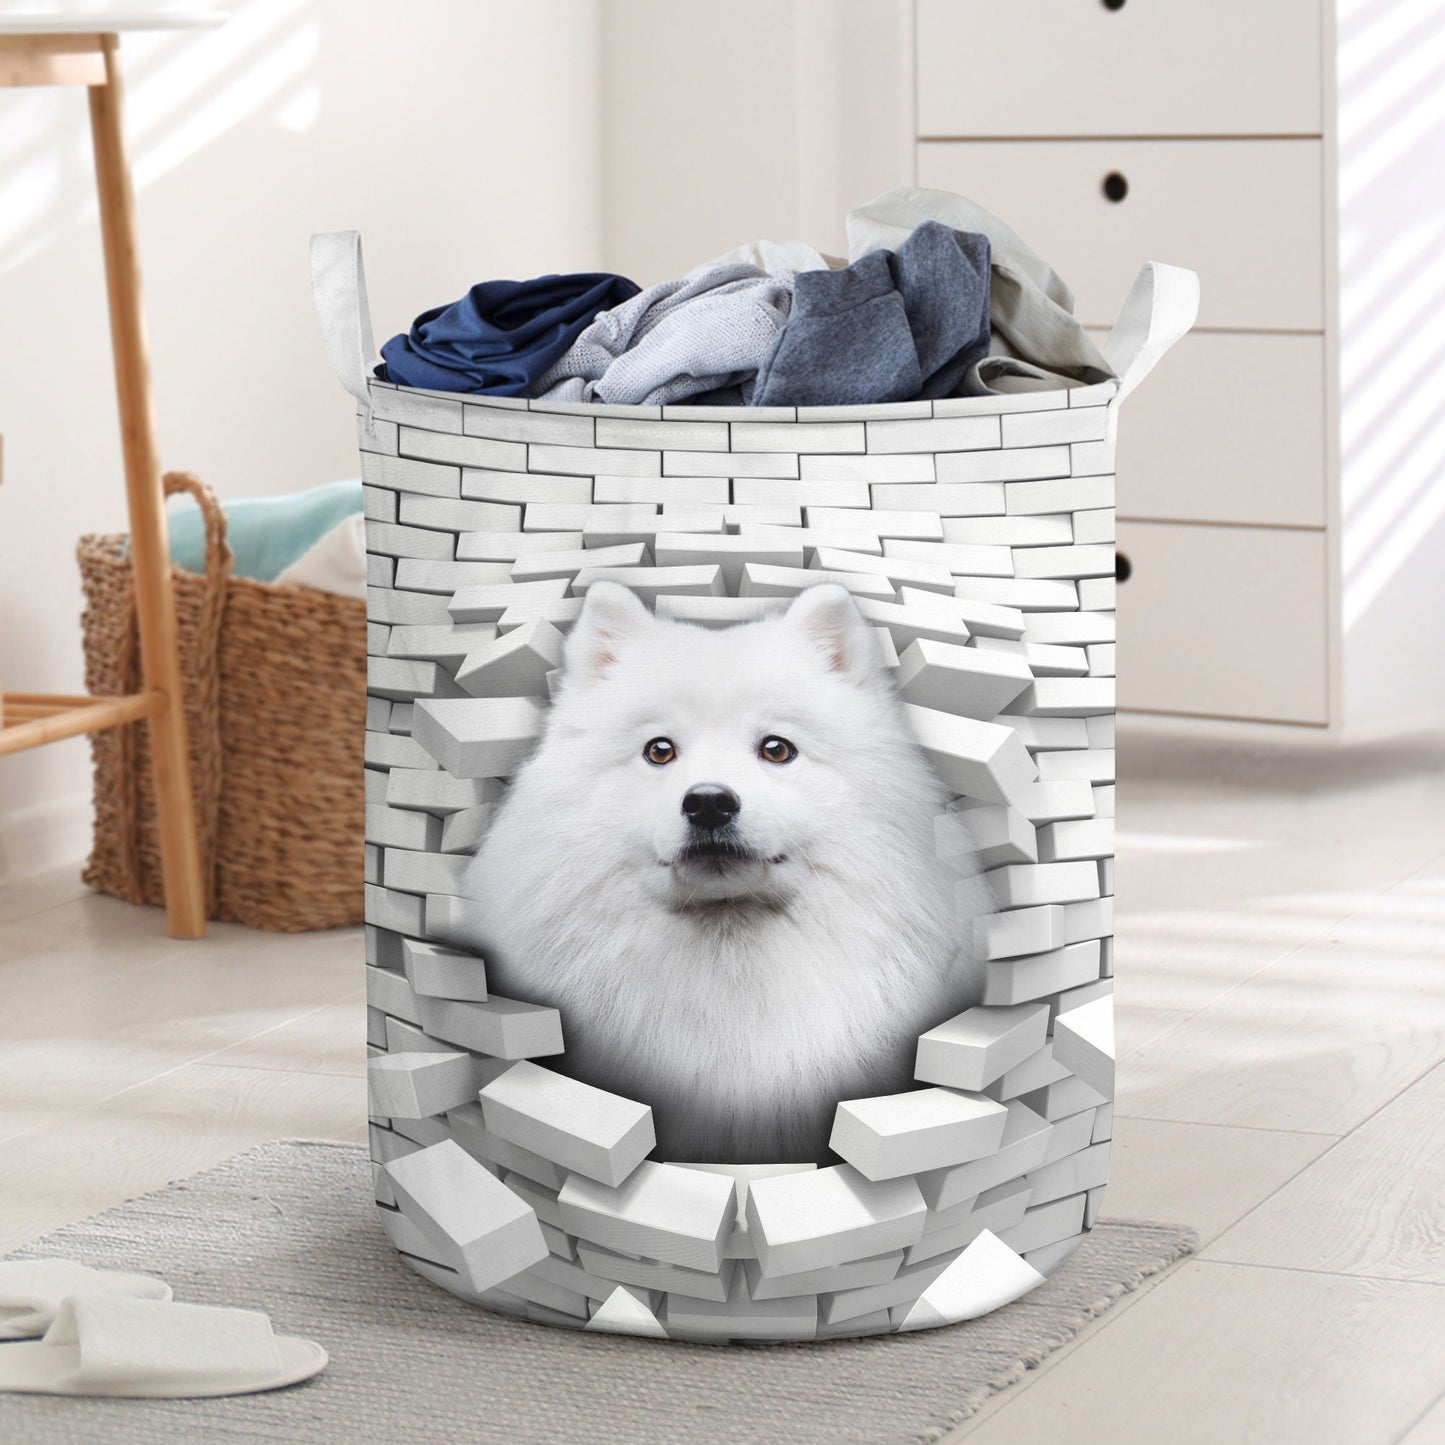 American Eskimo - In The Hole Of Wall Pattern Laundry Basket